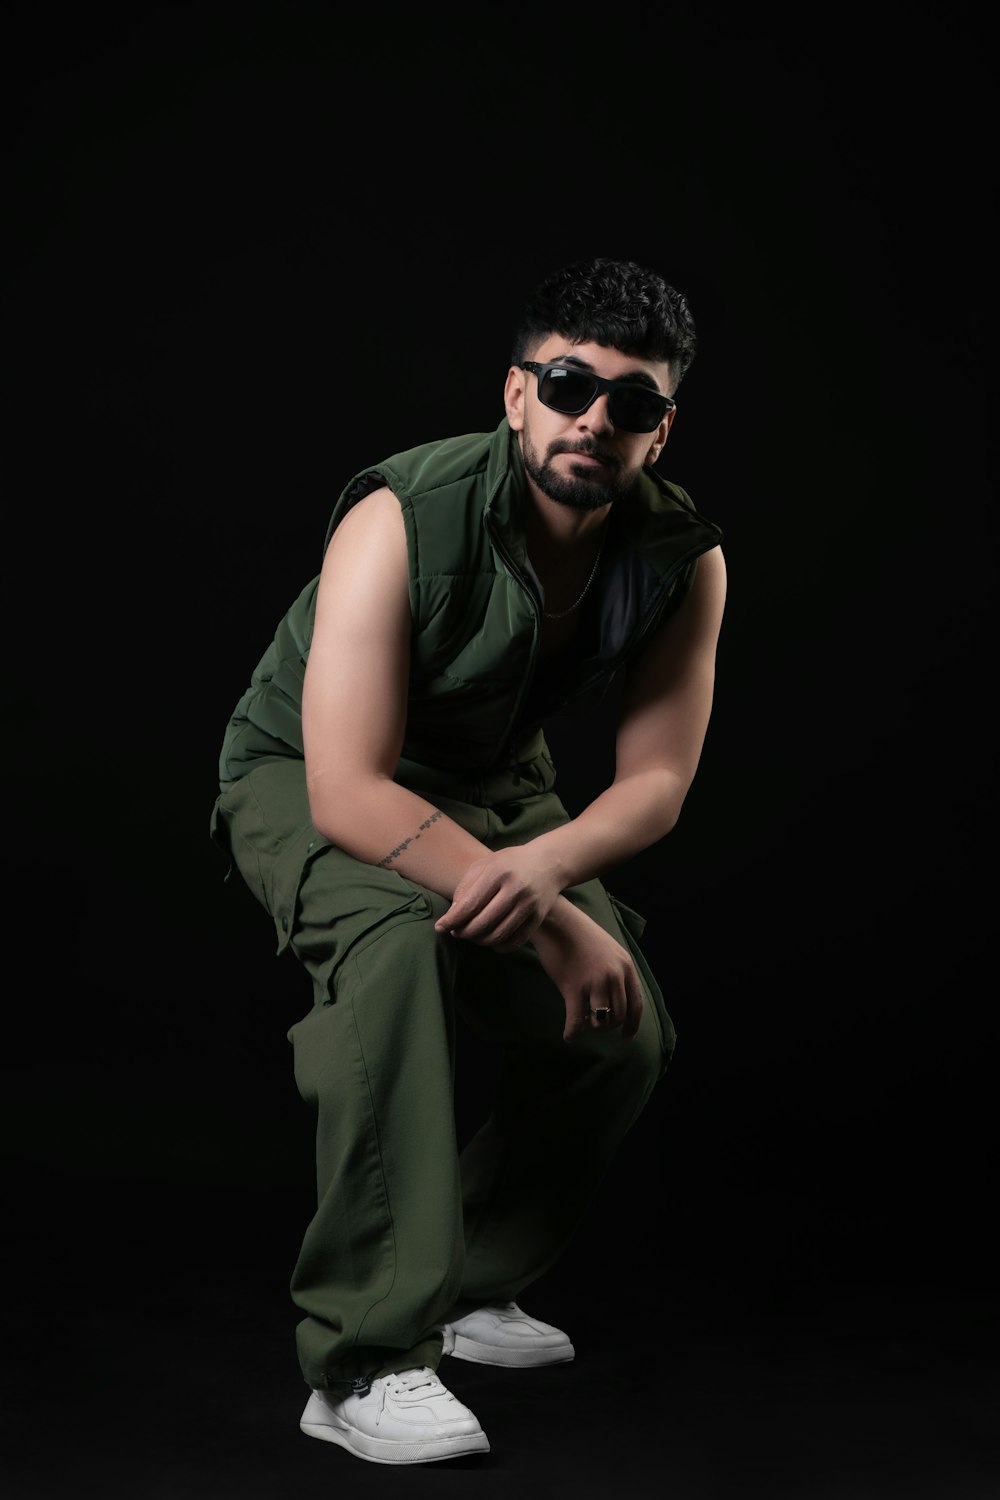 a man in a green outfit and sunglasses